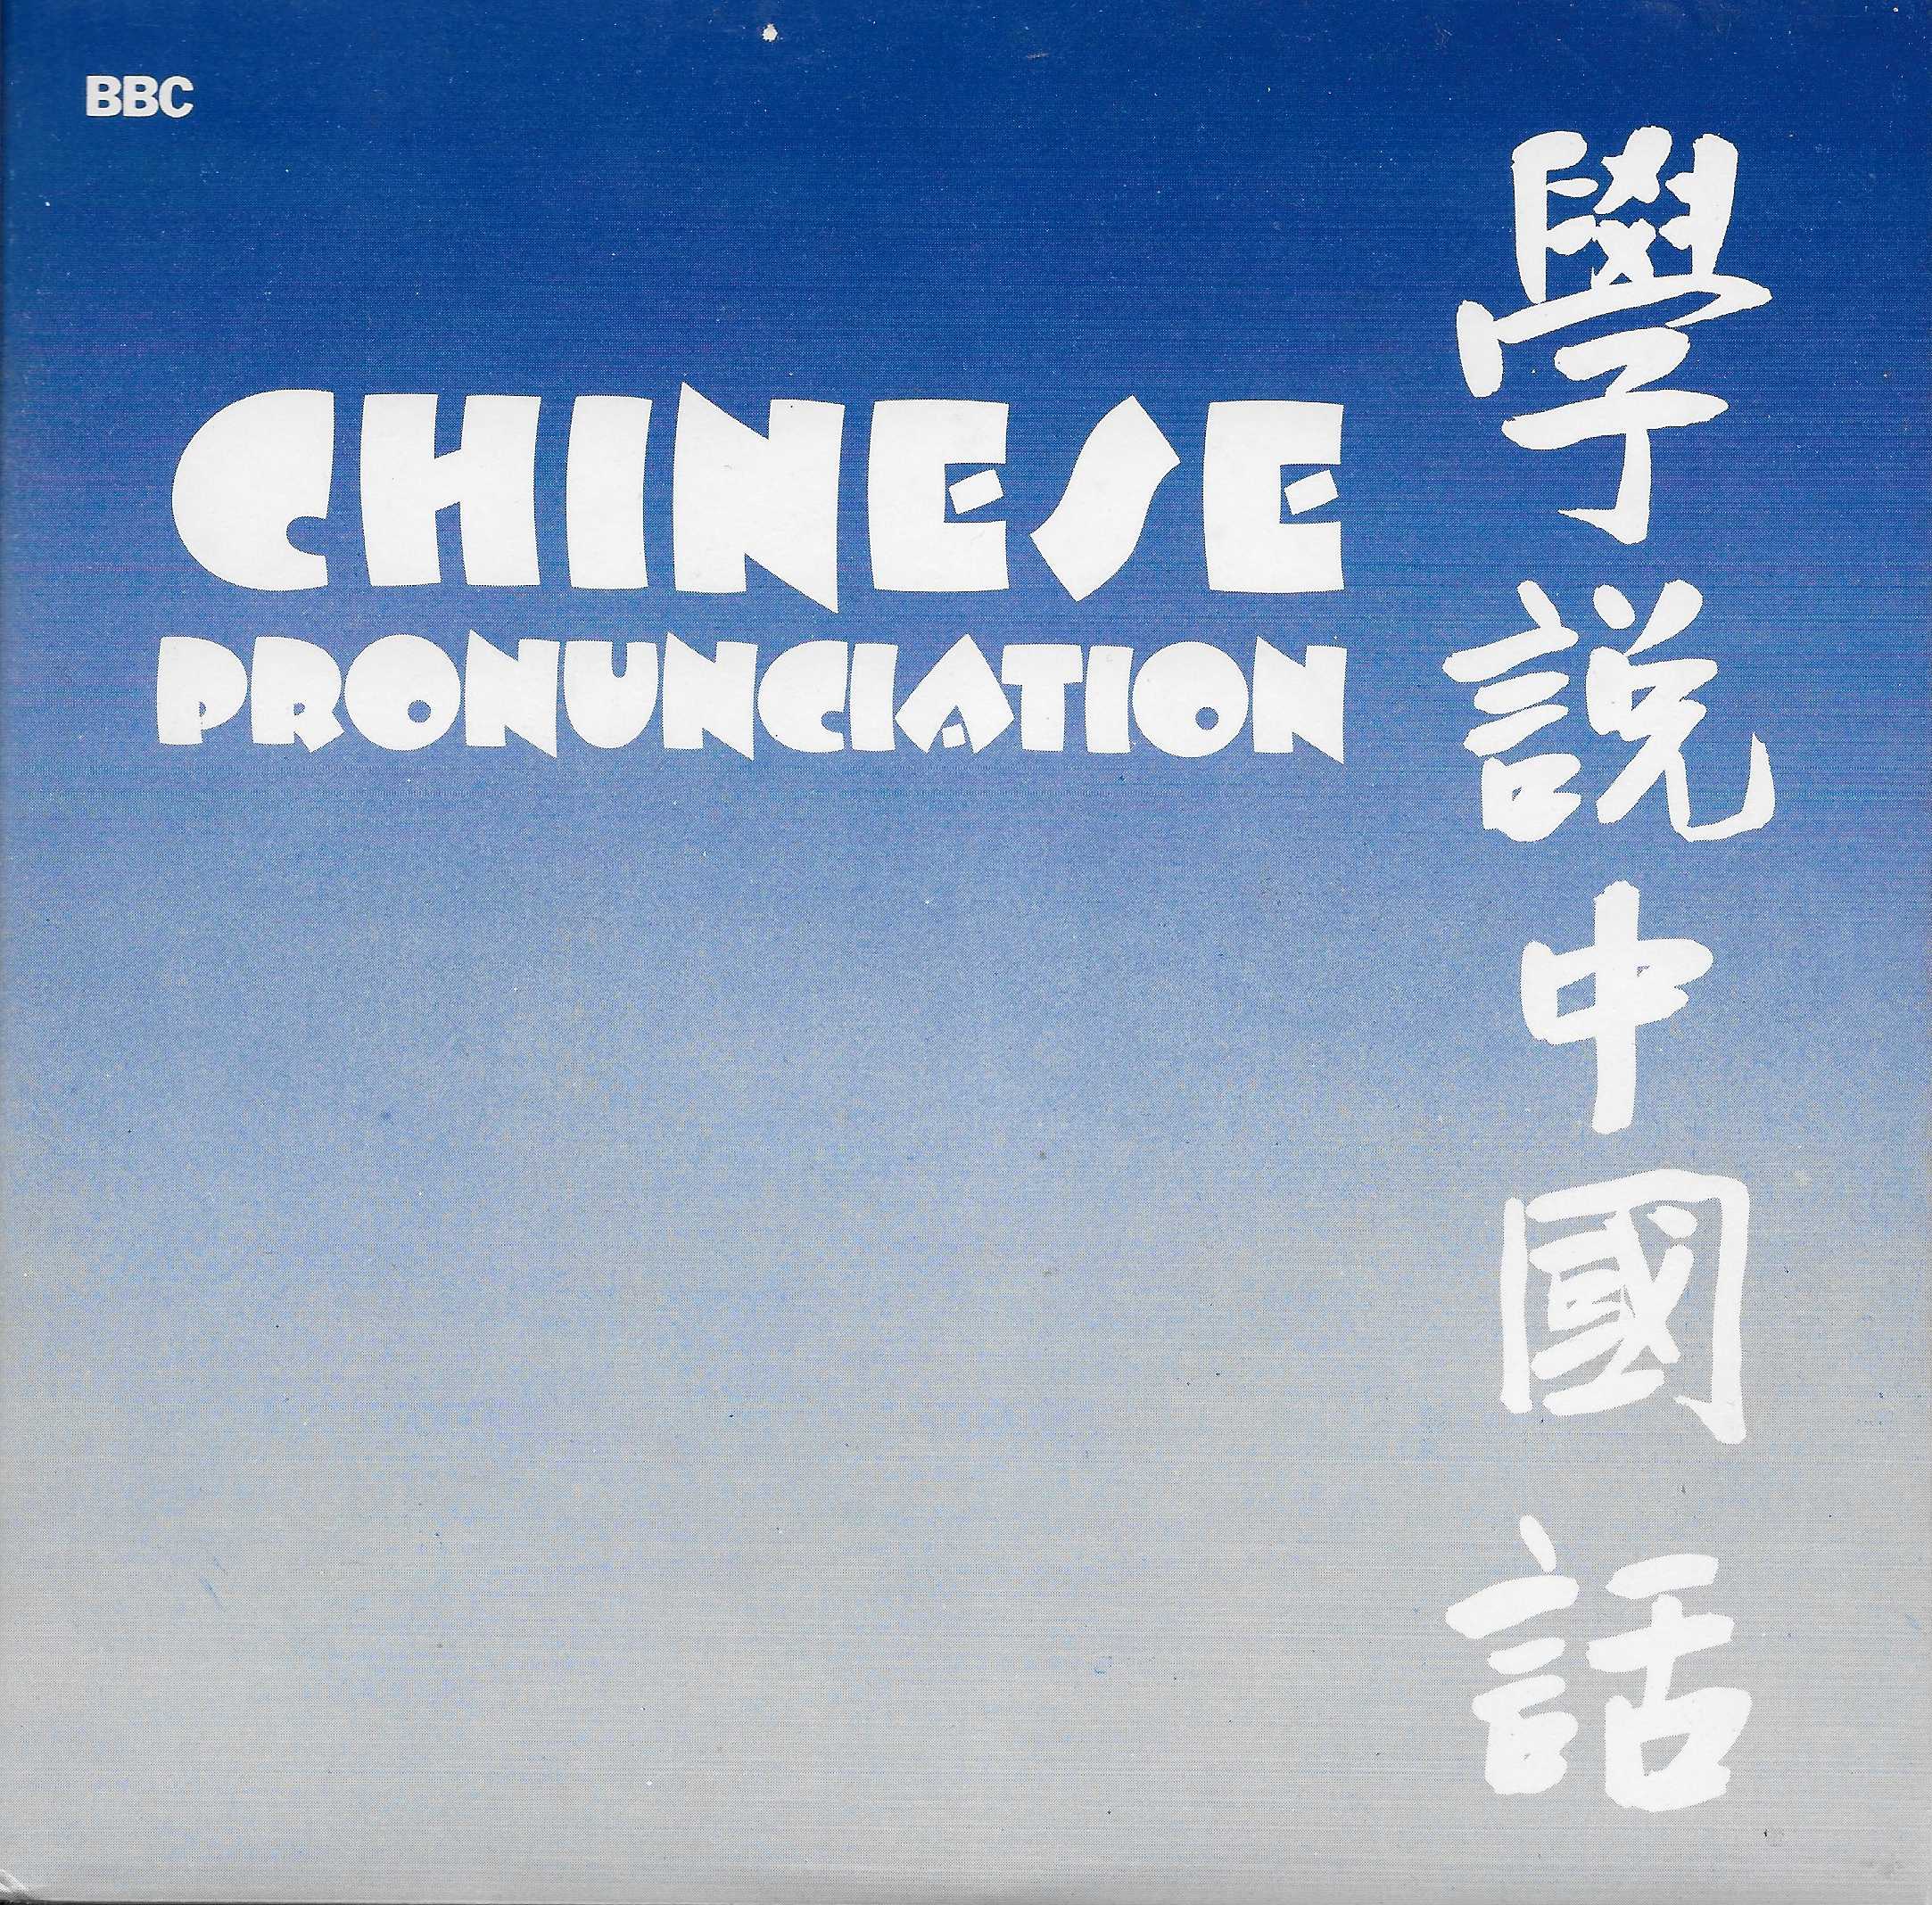 Picture of OP 107 Chinese pronunciation practice (Mandarin) by artist Paul Kratochvil / Terry Chang / Lucia Liu from the BBC records and Tapes library